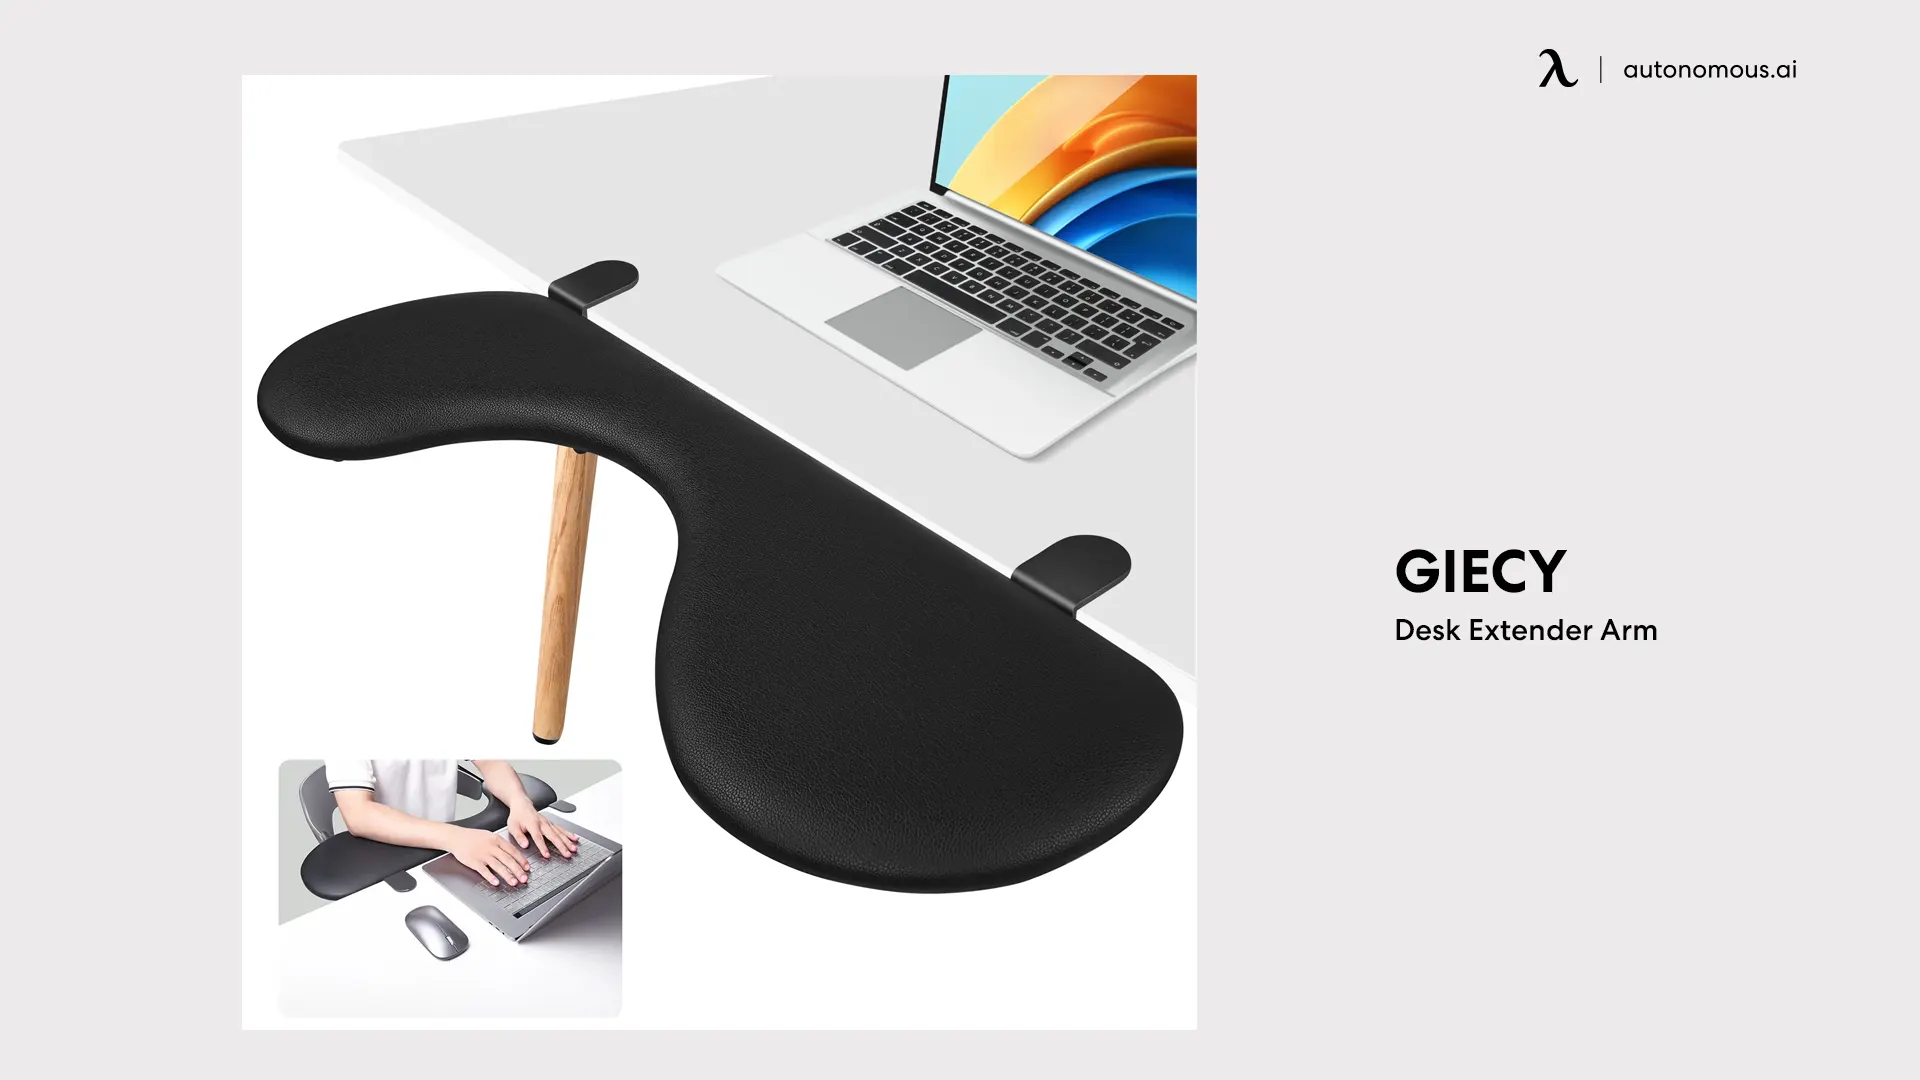 Desk Extender Arm by Giecy